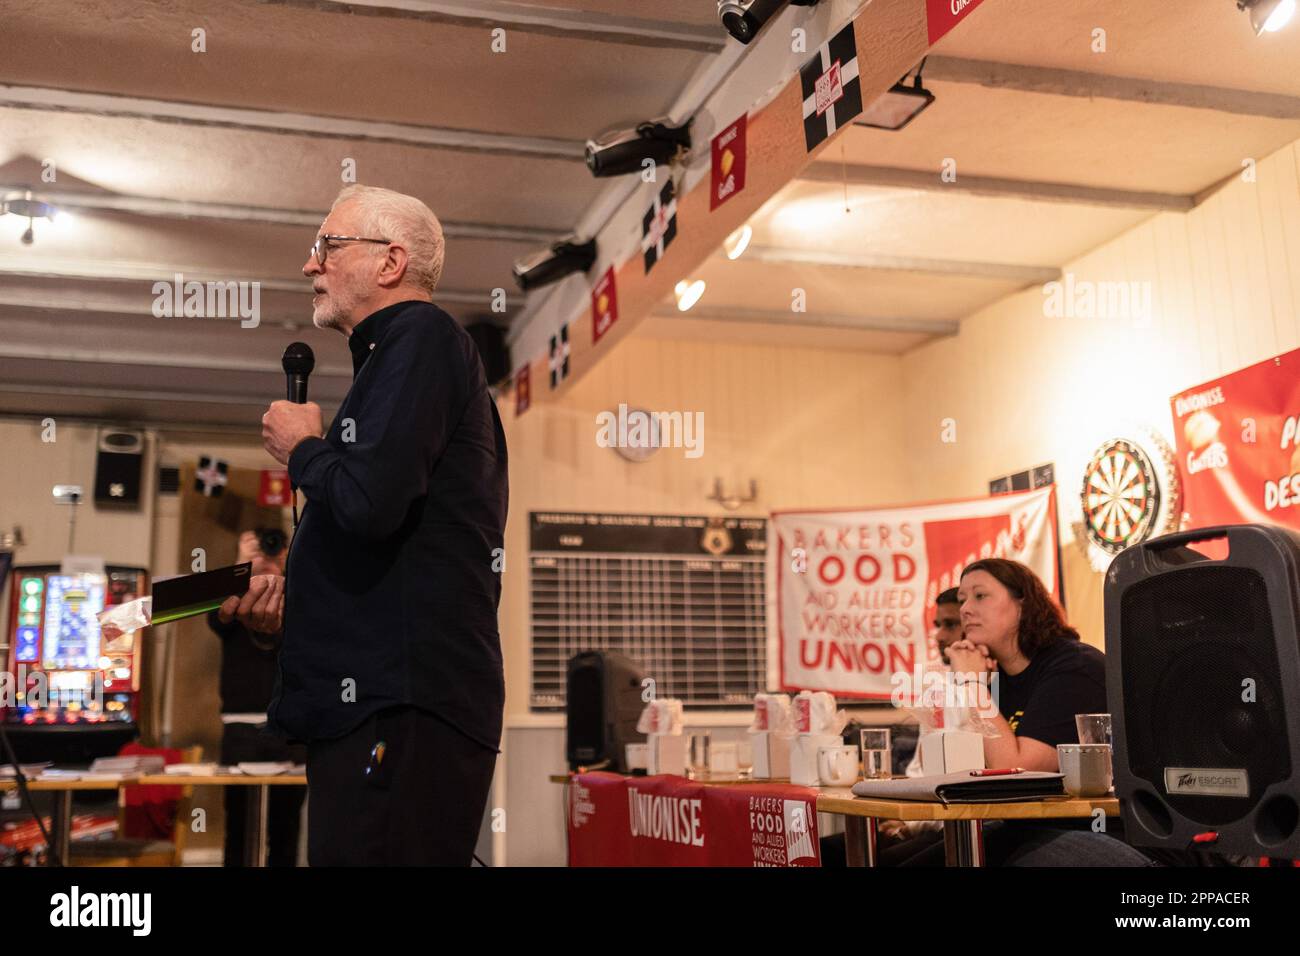 Former Labour leader Jeremy Corbyn MP speaks inside the Callington Social Club in Callington, North Cornwall as staff vote on the unionisation of the factory. Stock Photo